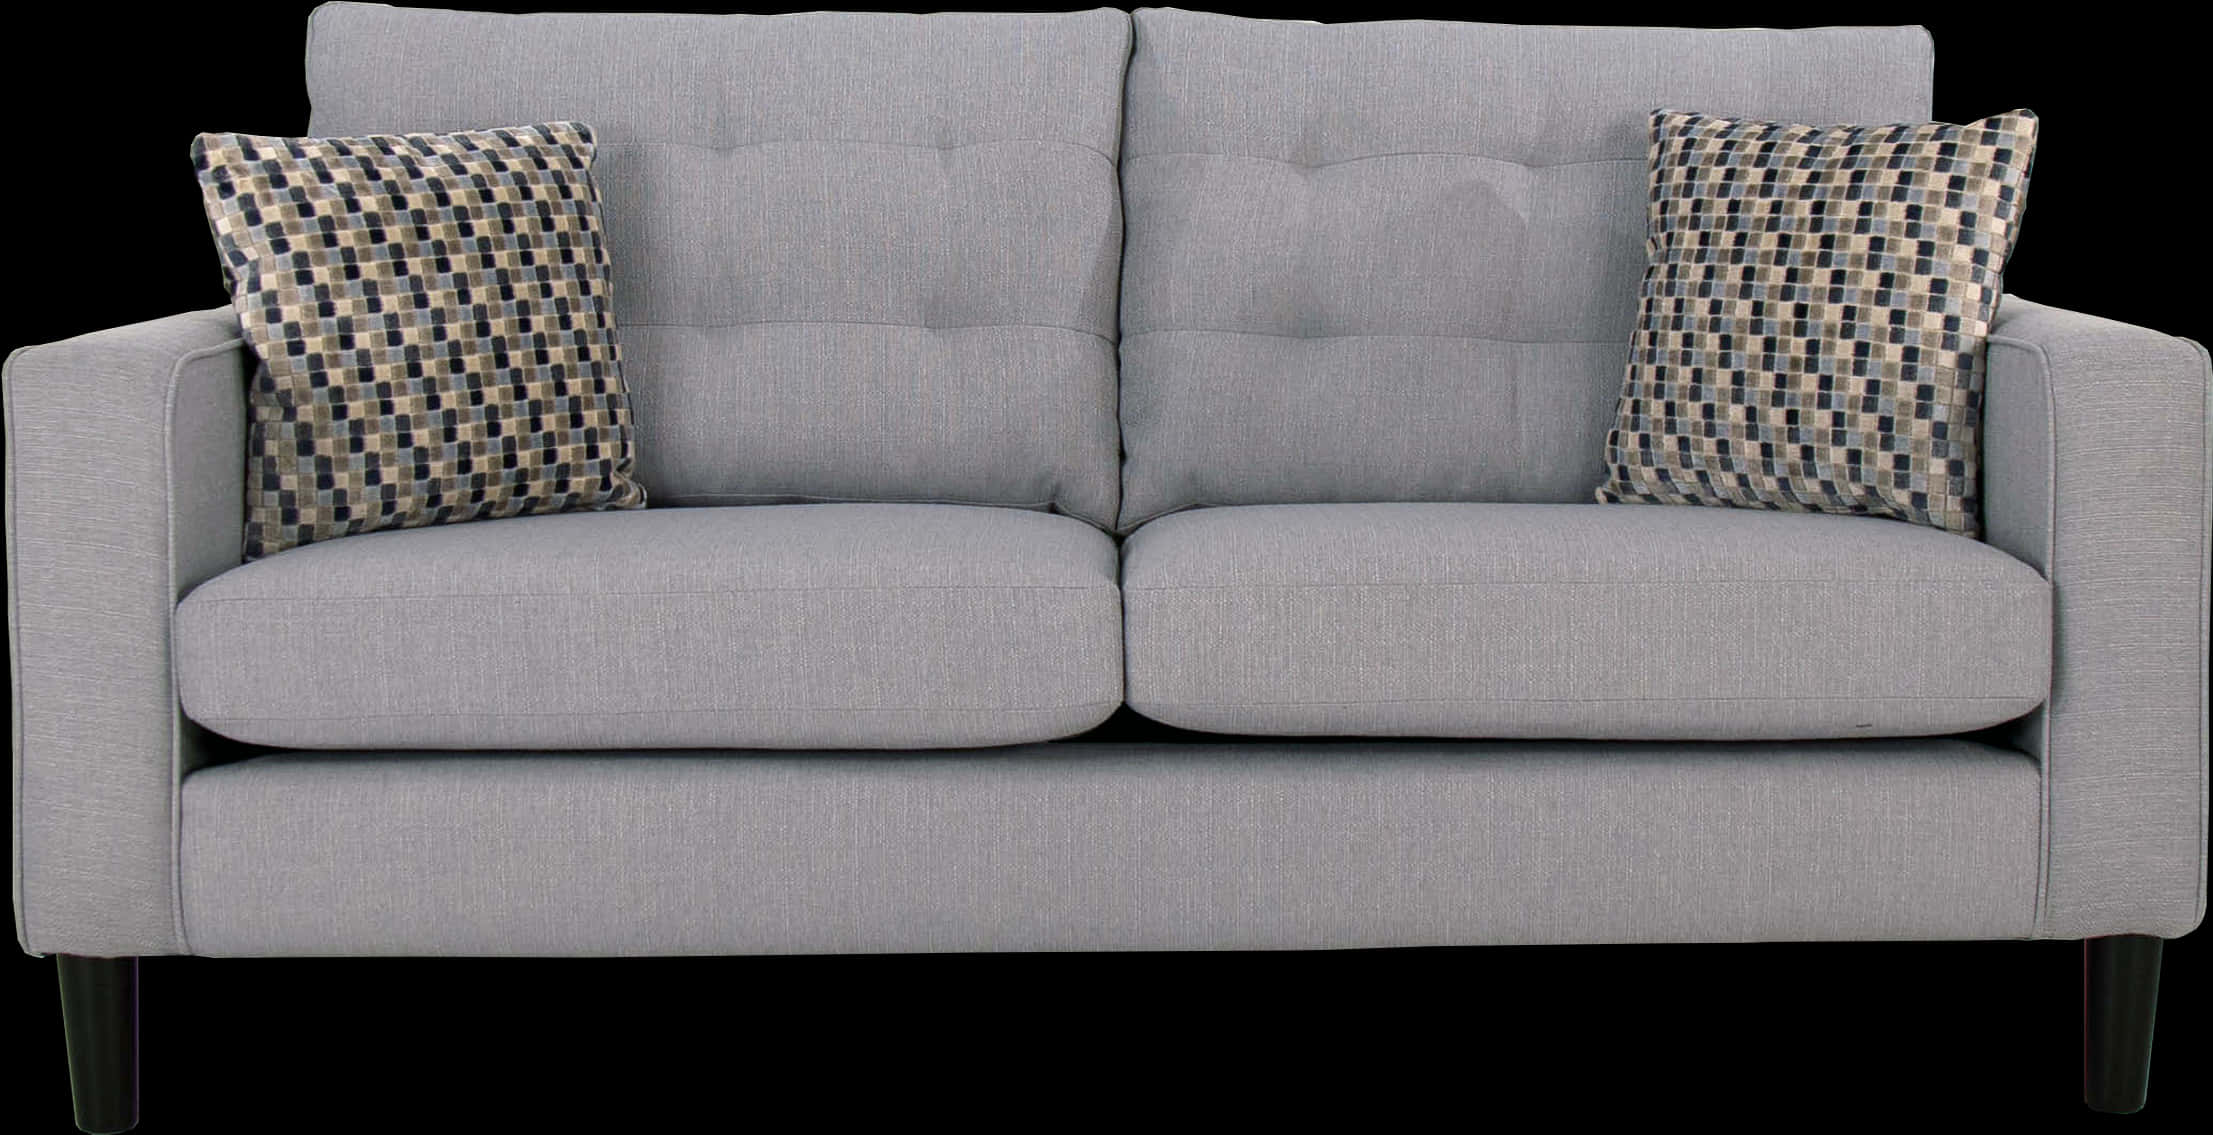 Modern Gray Couchwith Patterned Pillows